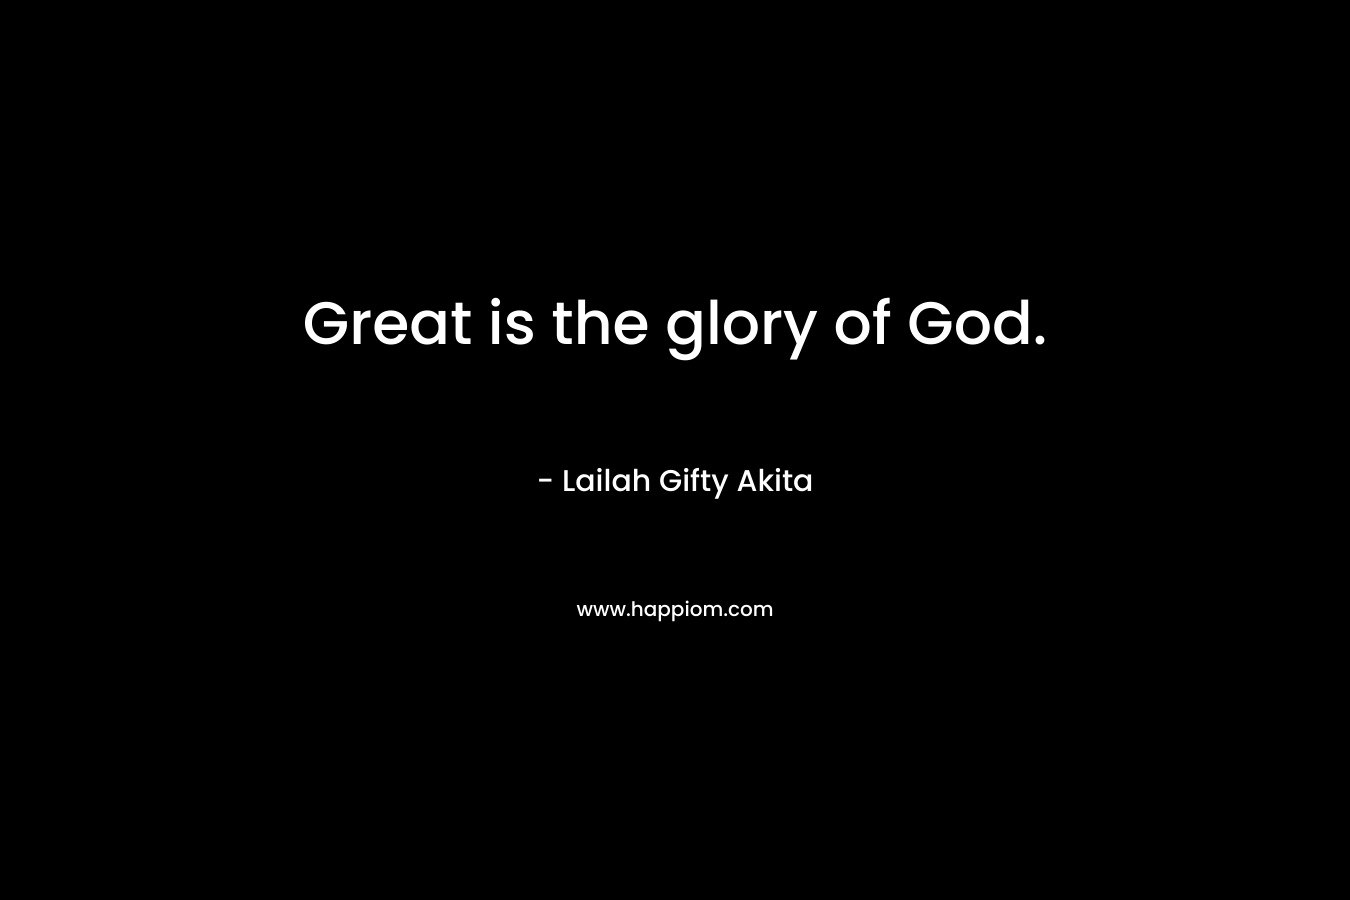 Great is the glory of God.